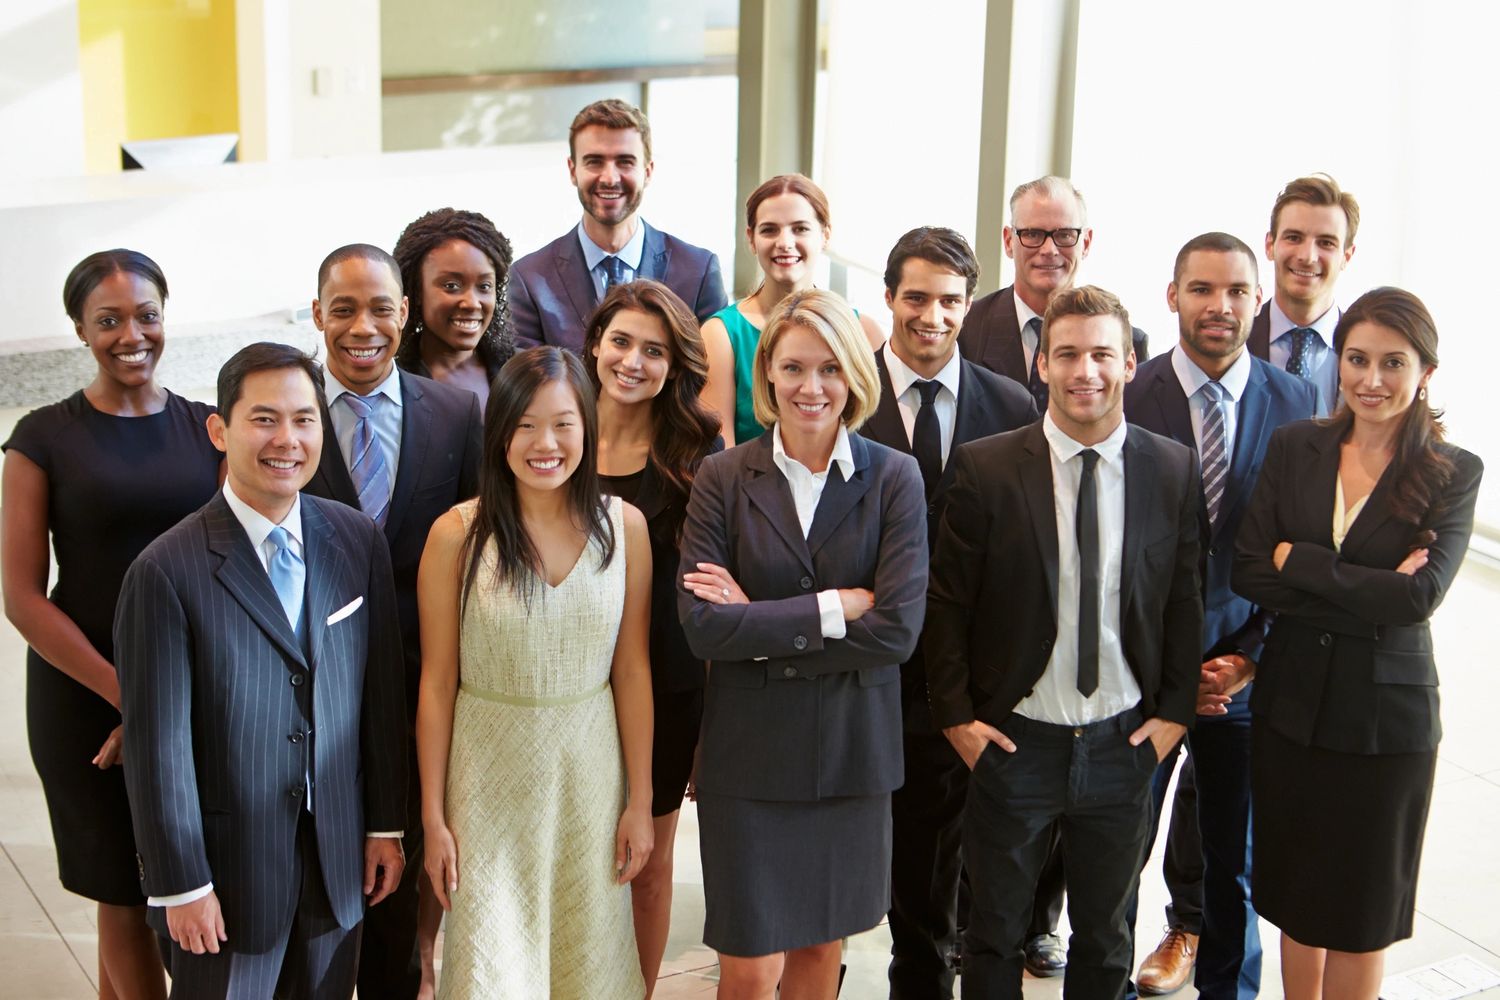 Image of a large group of business people smiling